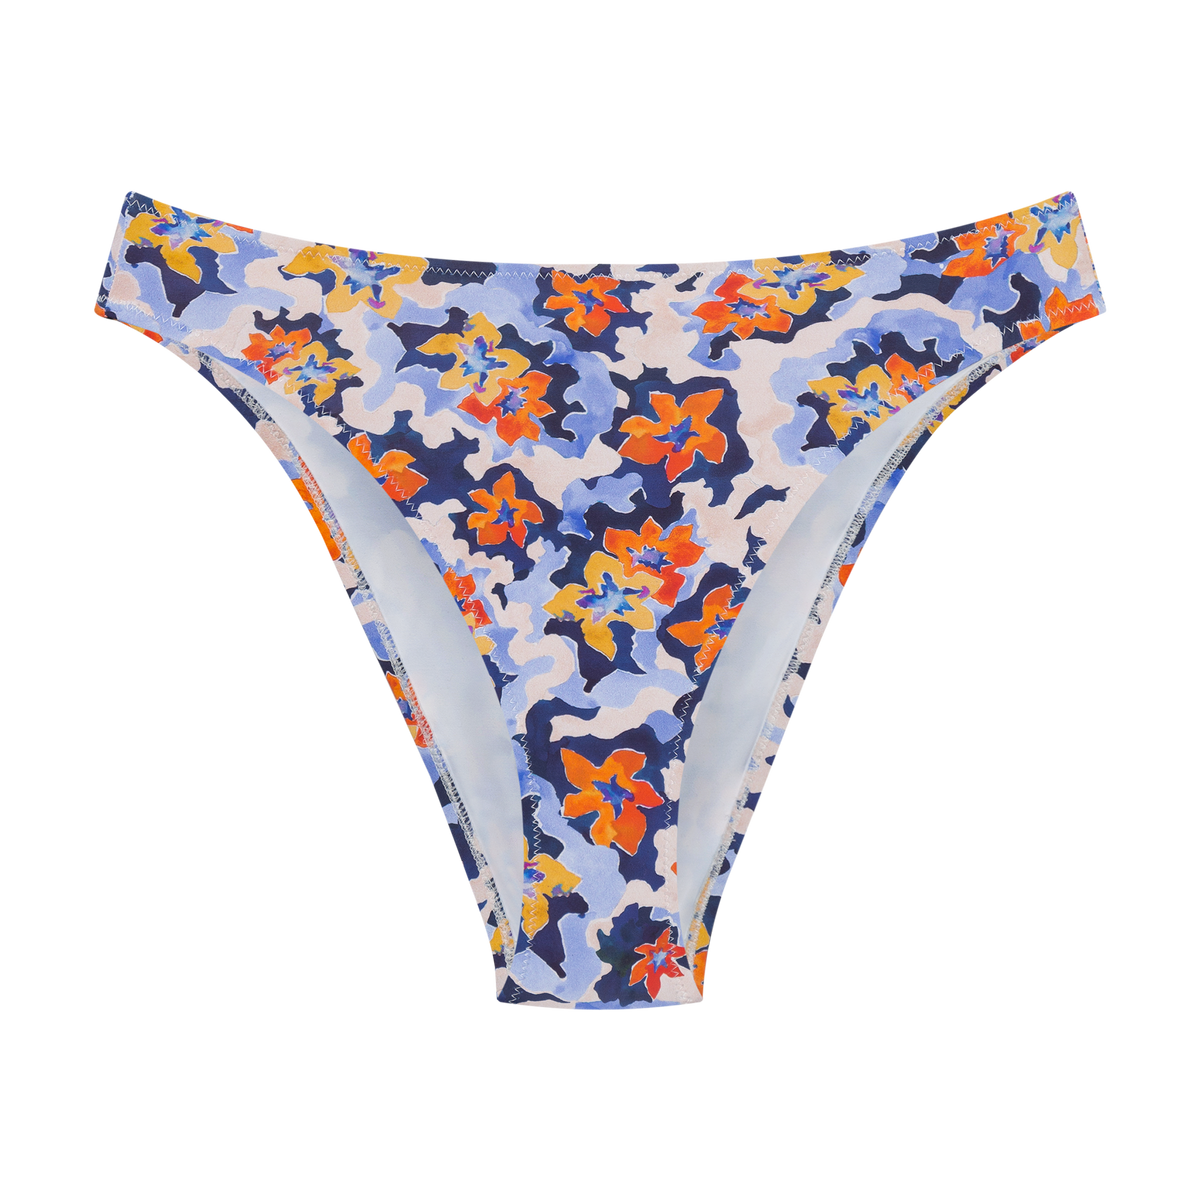 high-rise high-cut bikini bottom blue and orange floral print made from recycled materials